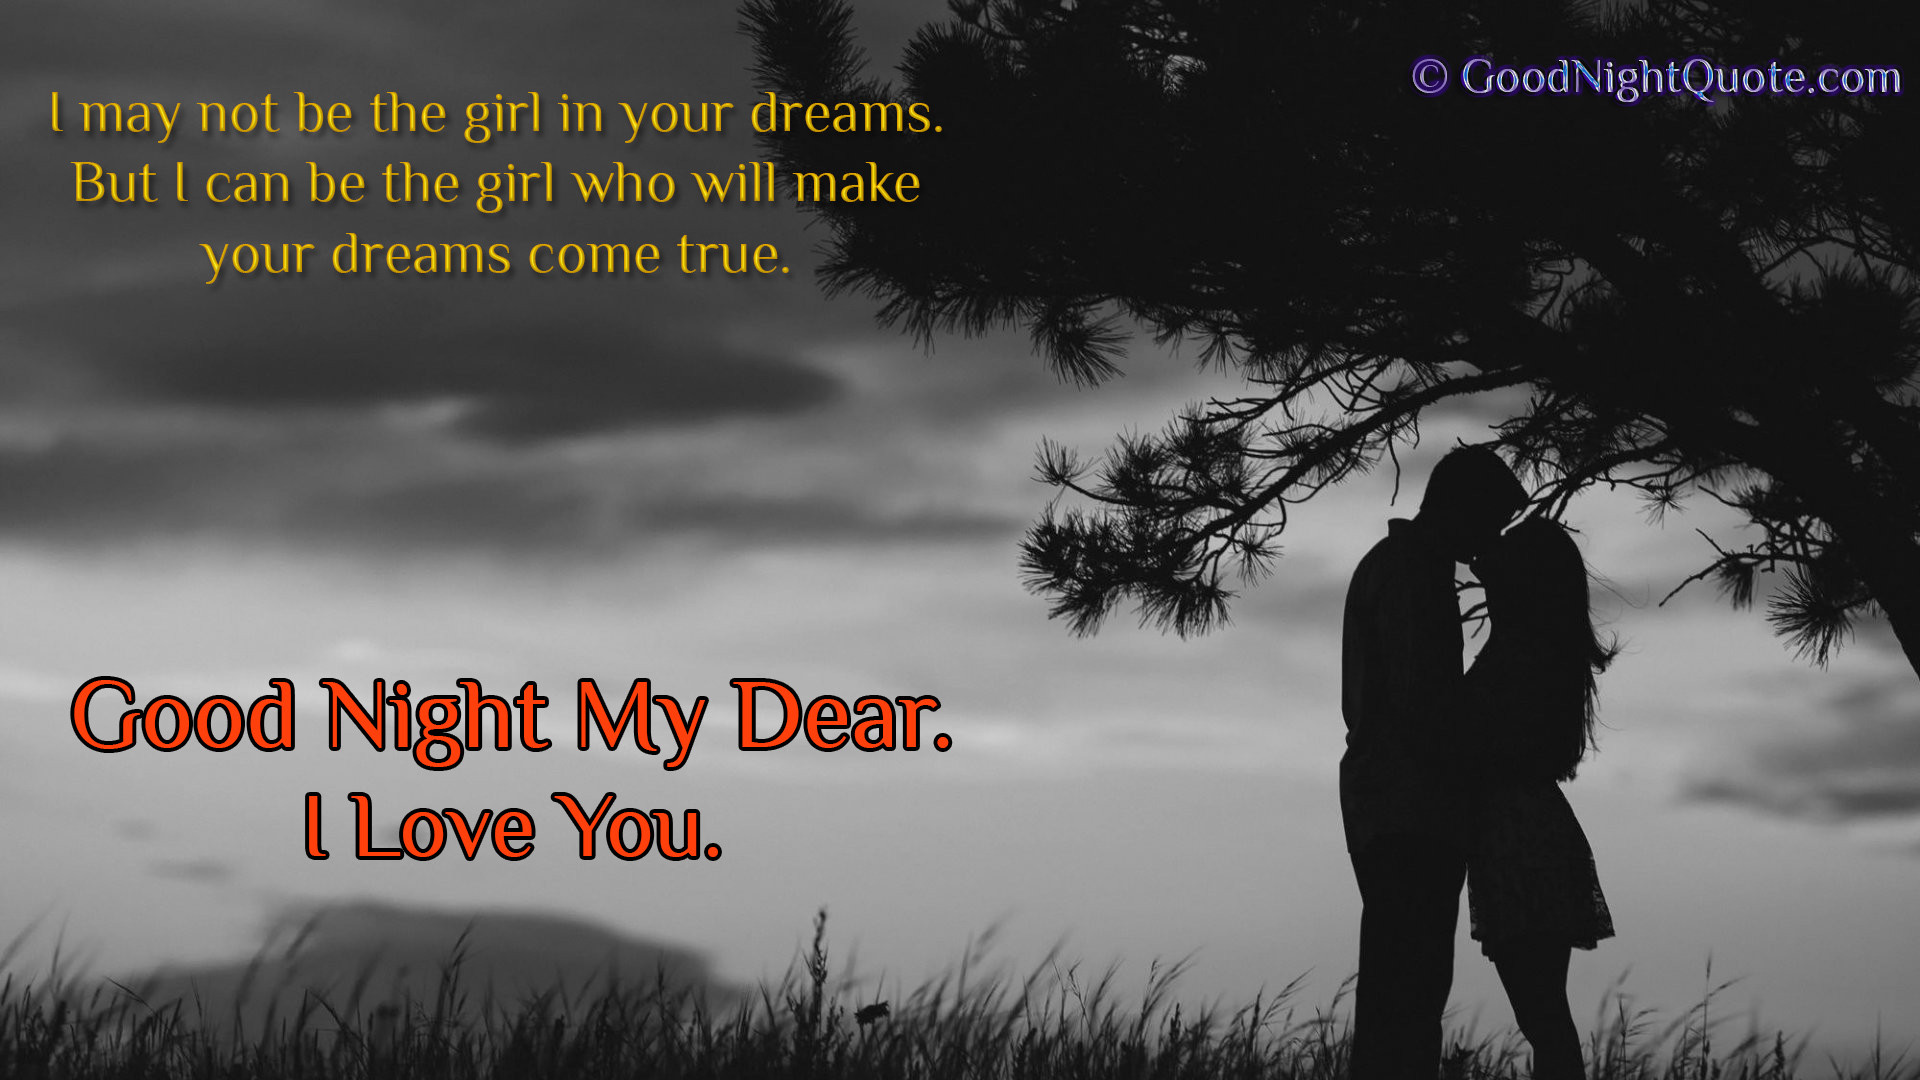 Cute Good Night Love Quote For Boy Friend 1920x1080